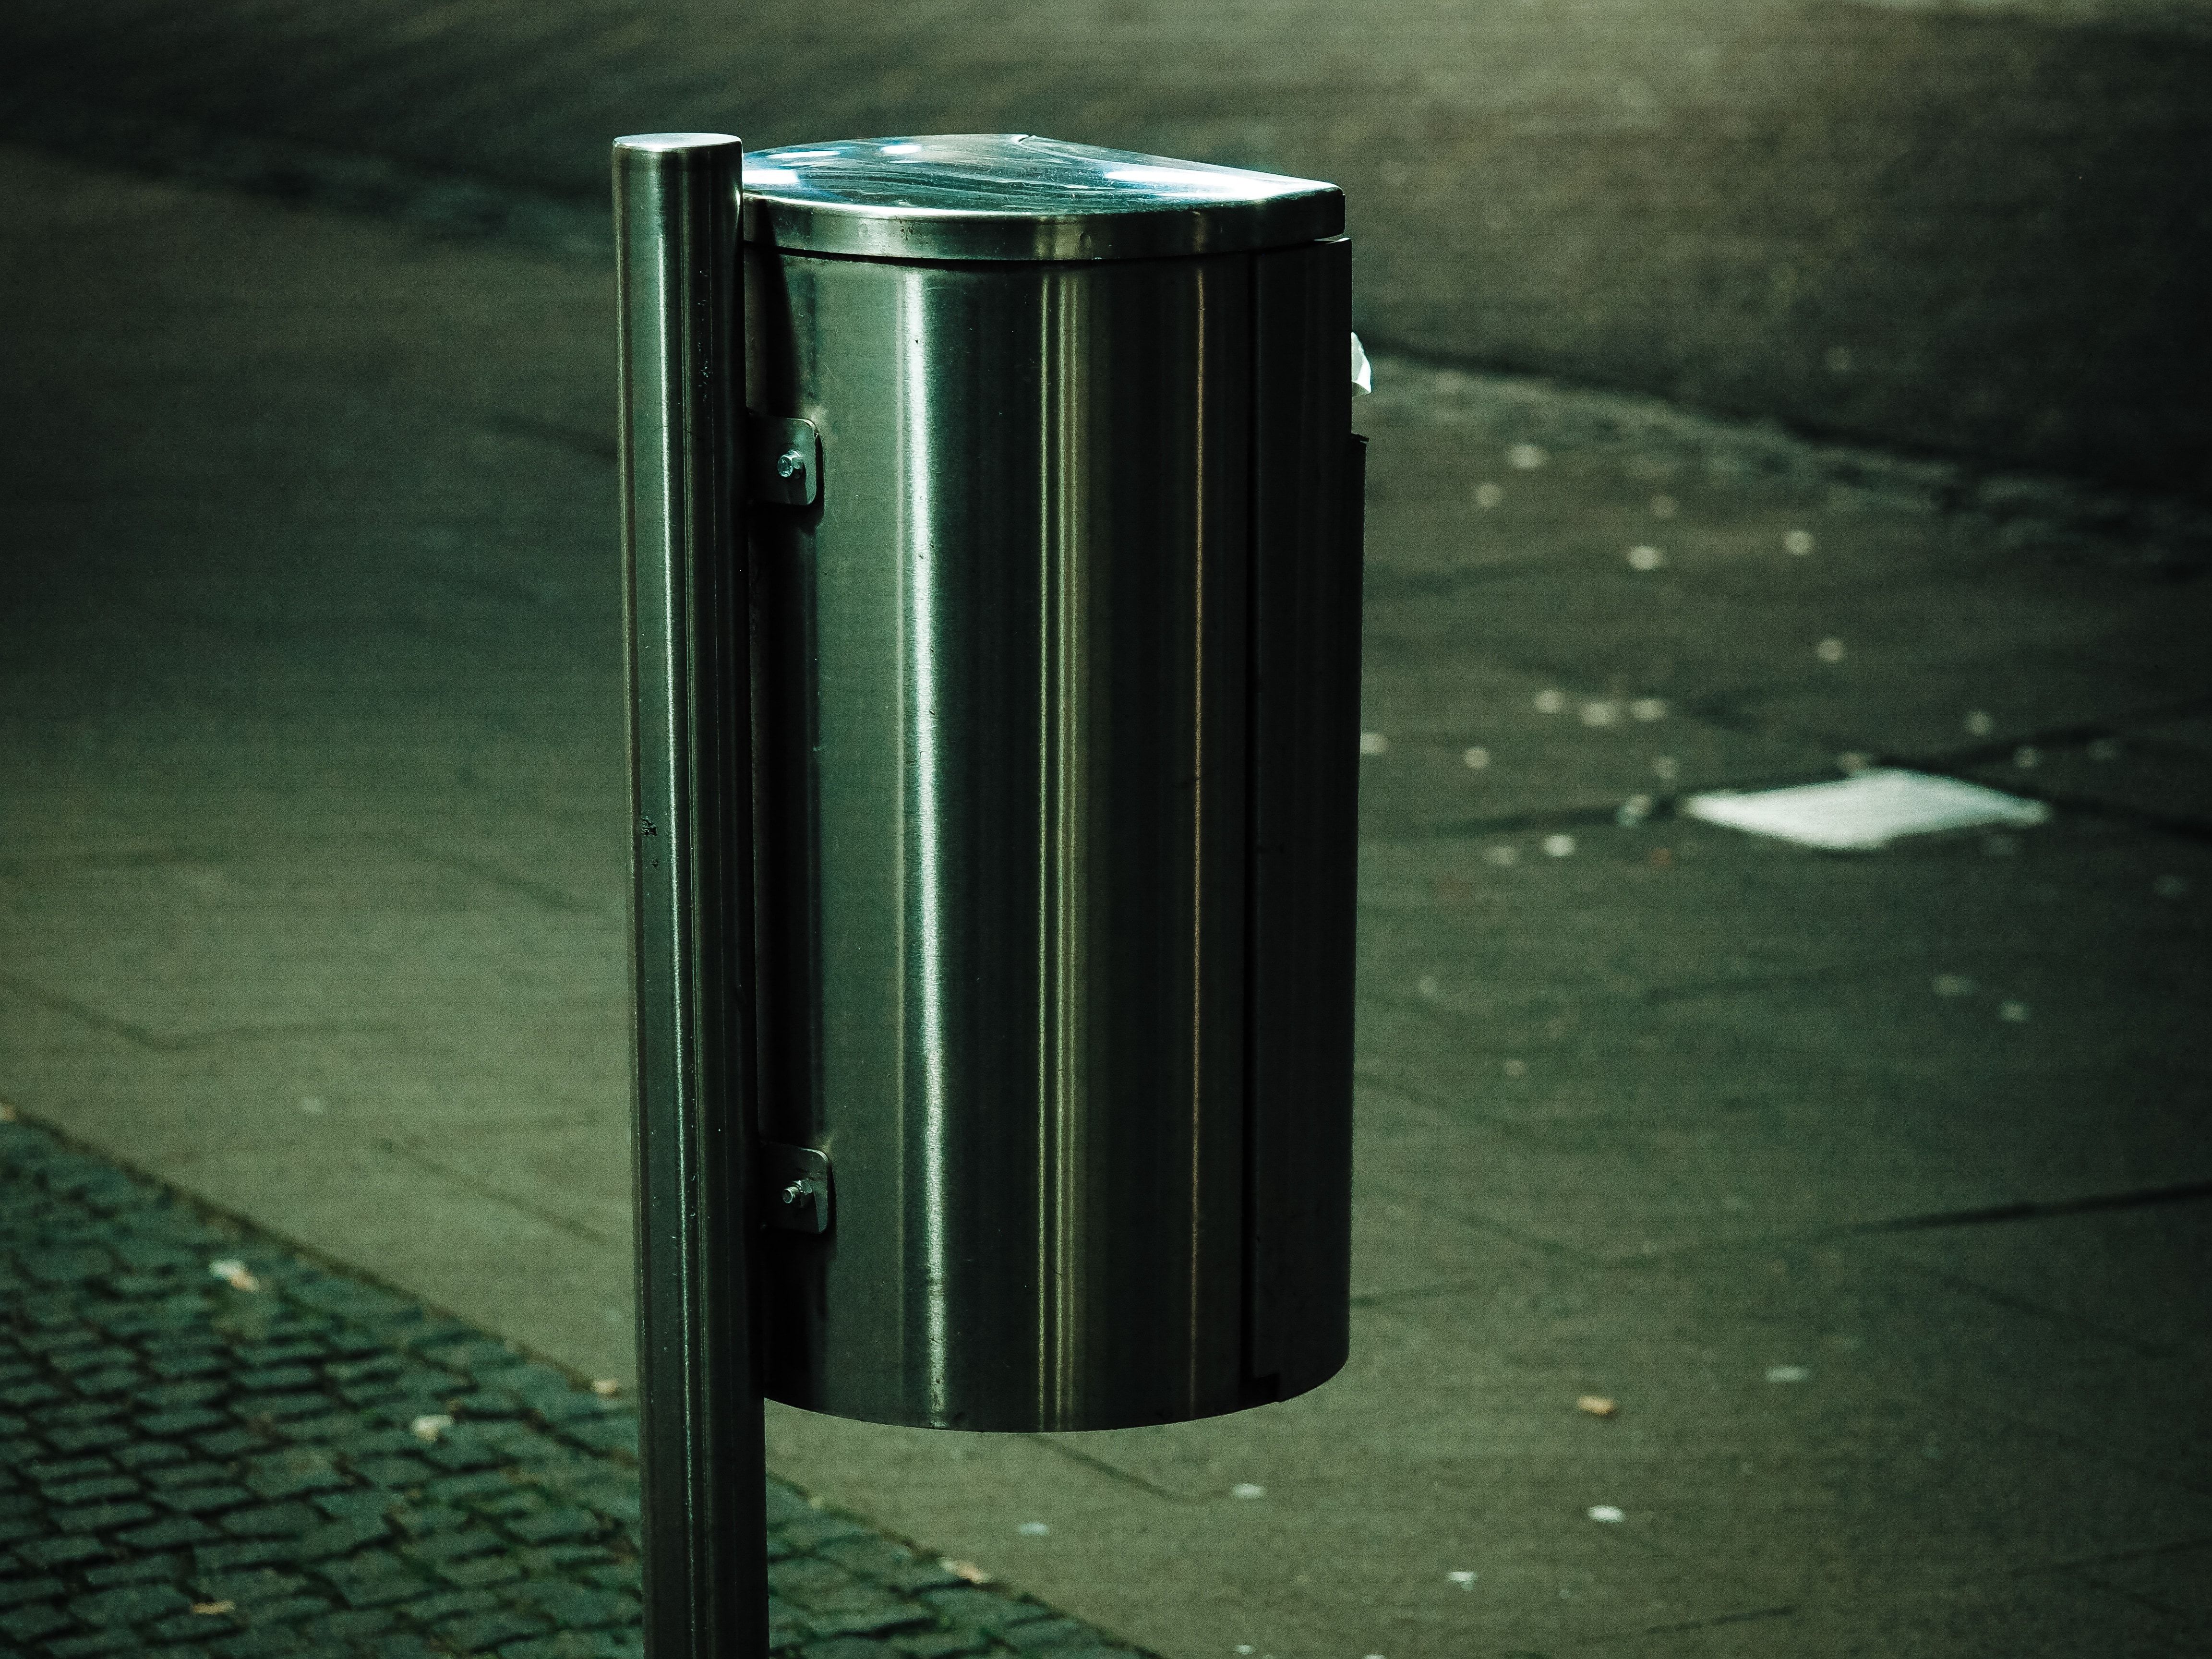 stainless steel cylindrical trash bin free image